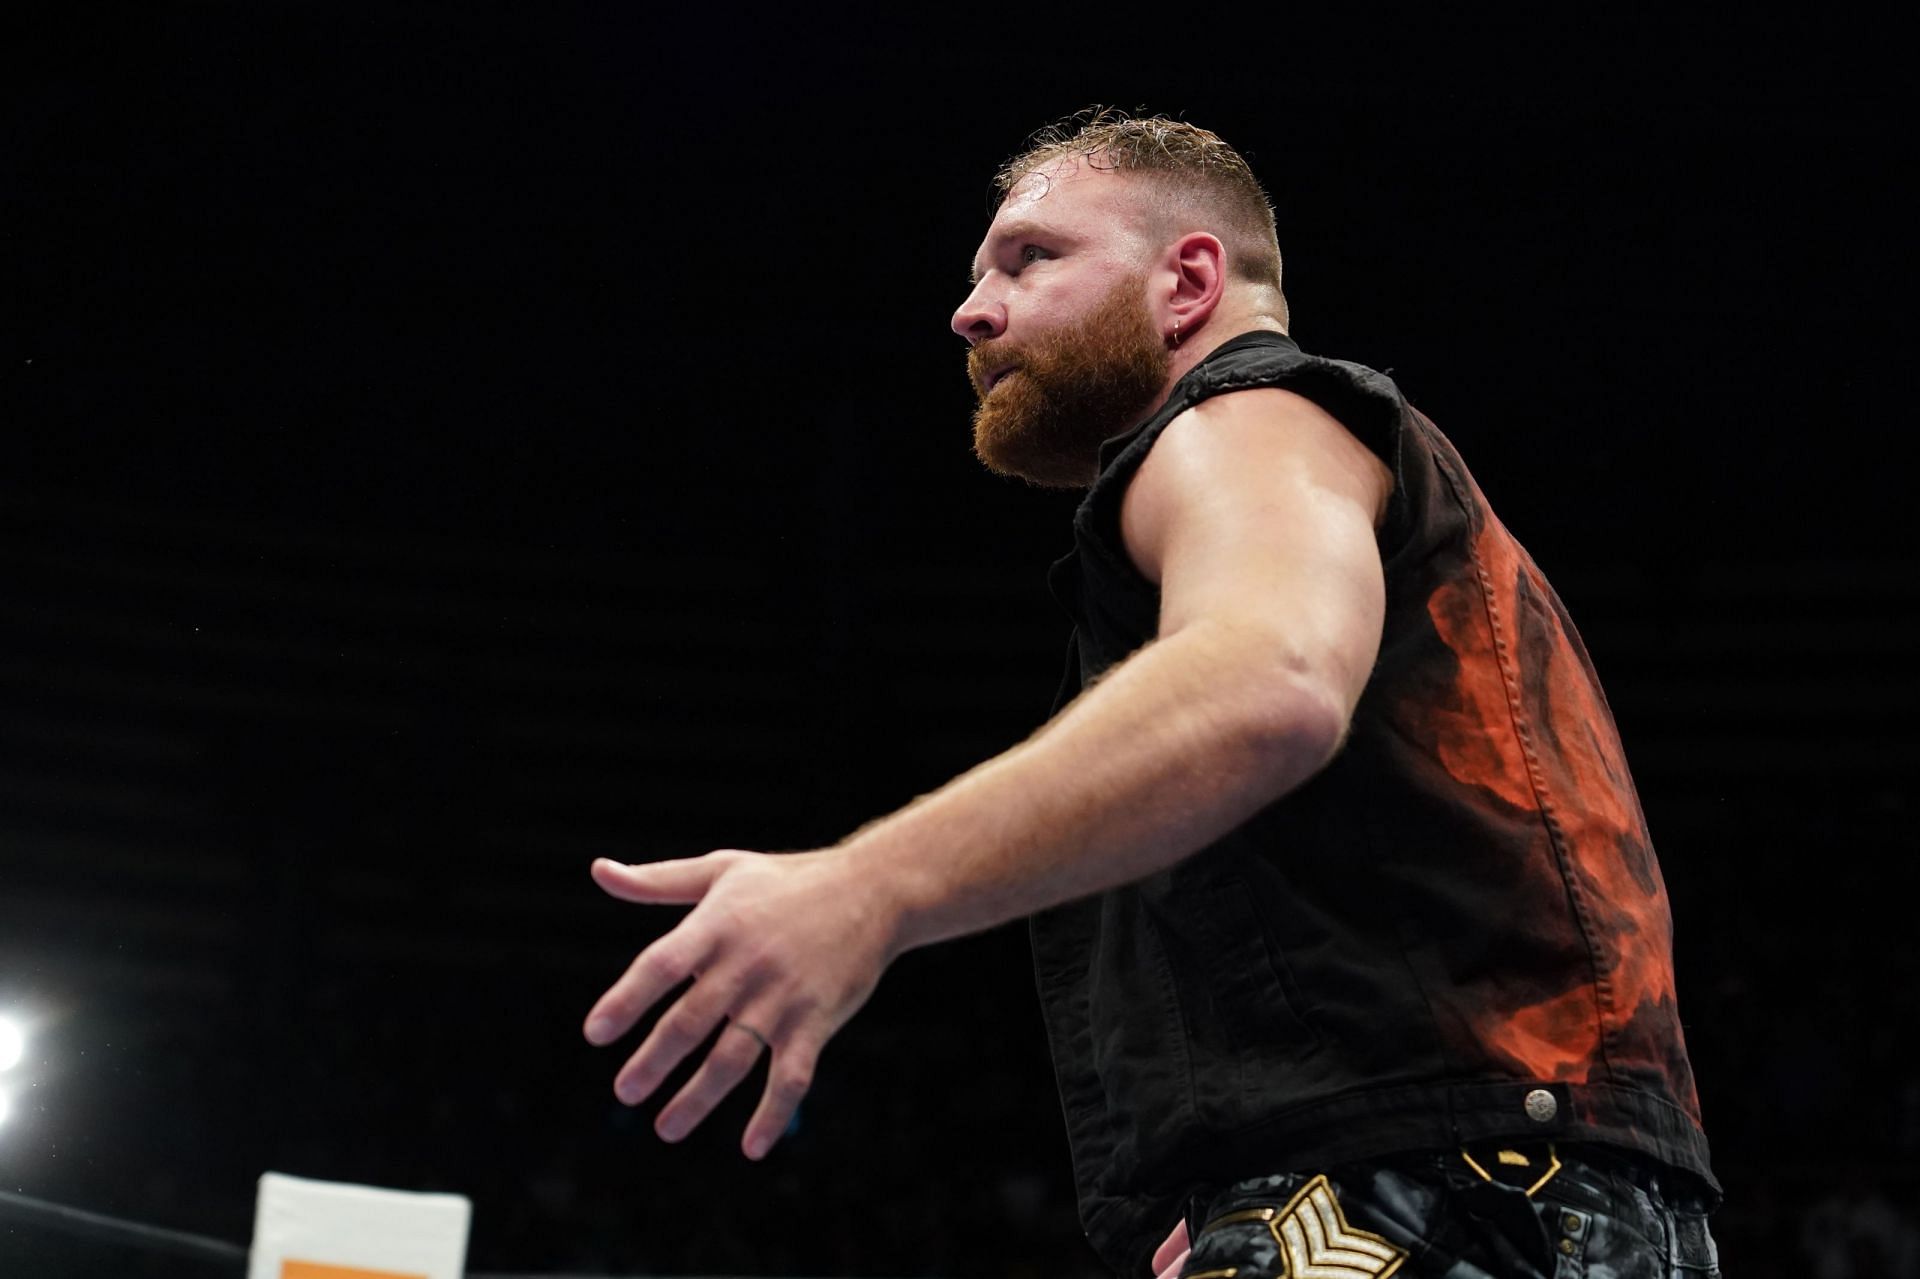 Jon Moxley is currently signed to AEW